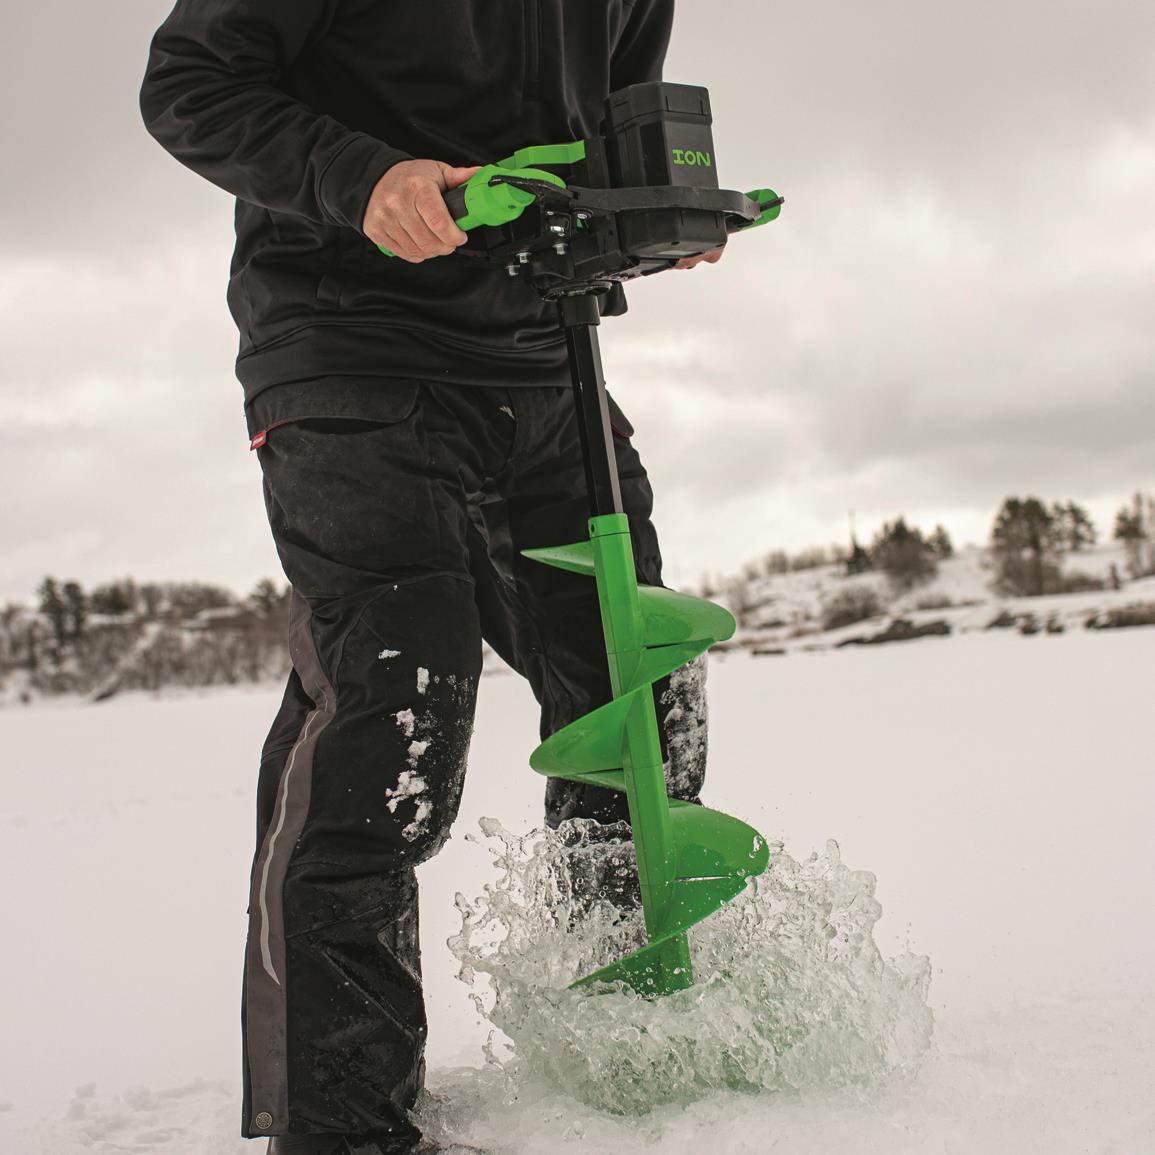 StrikeMaster Lithium 40V Ice Auger - 701108, Ice Augers at Sportsman's Guide